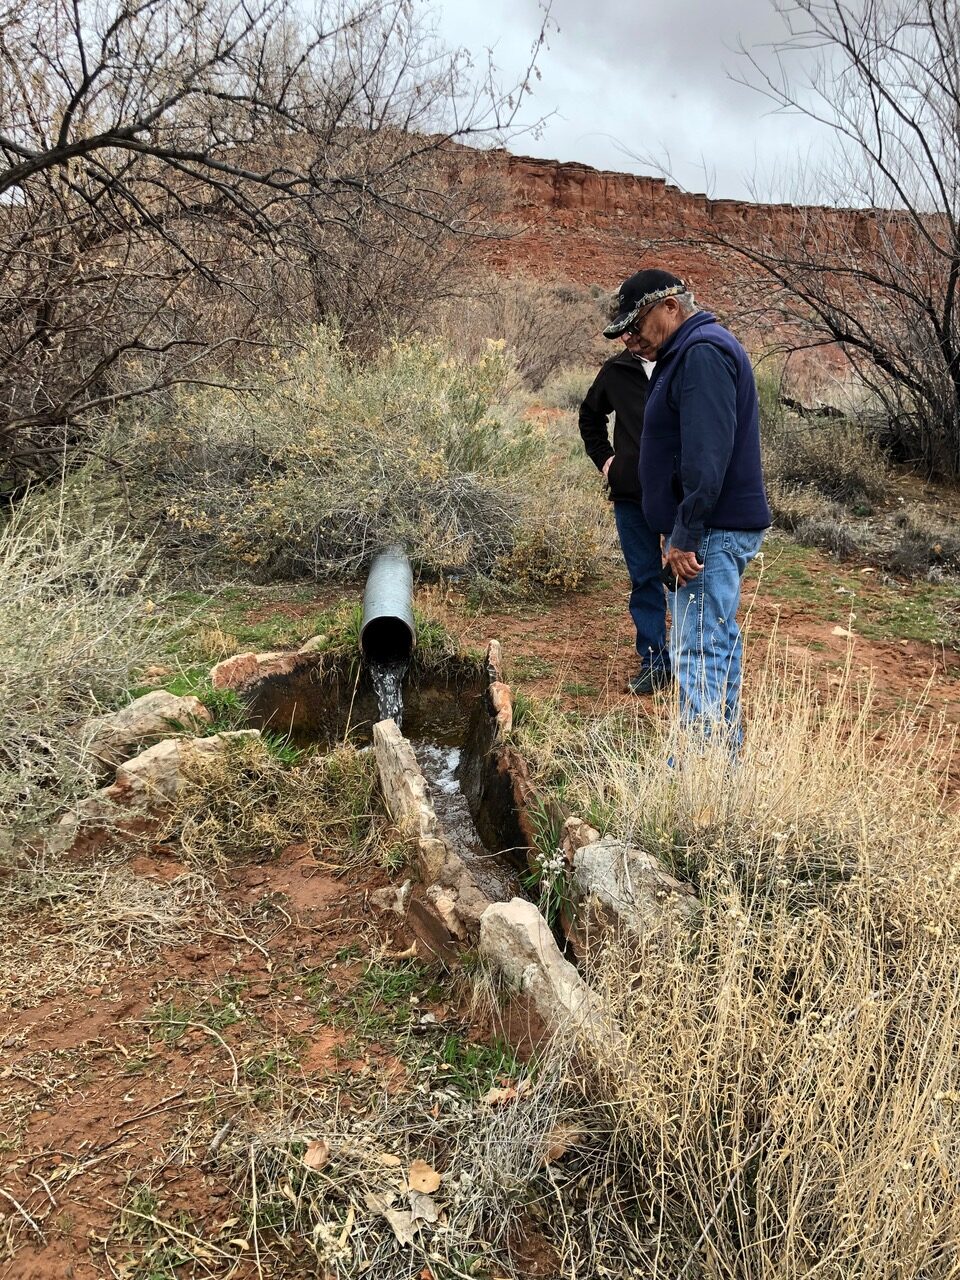 Two project partners standing next to spring on the Navajo Reservation